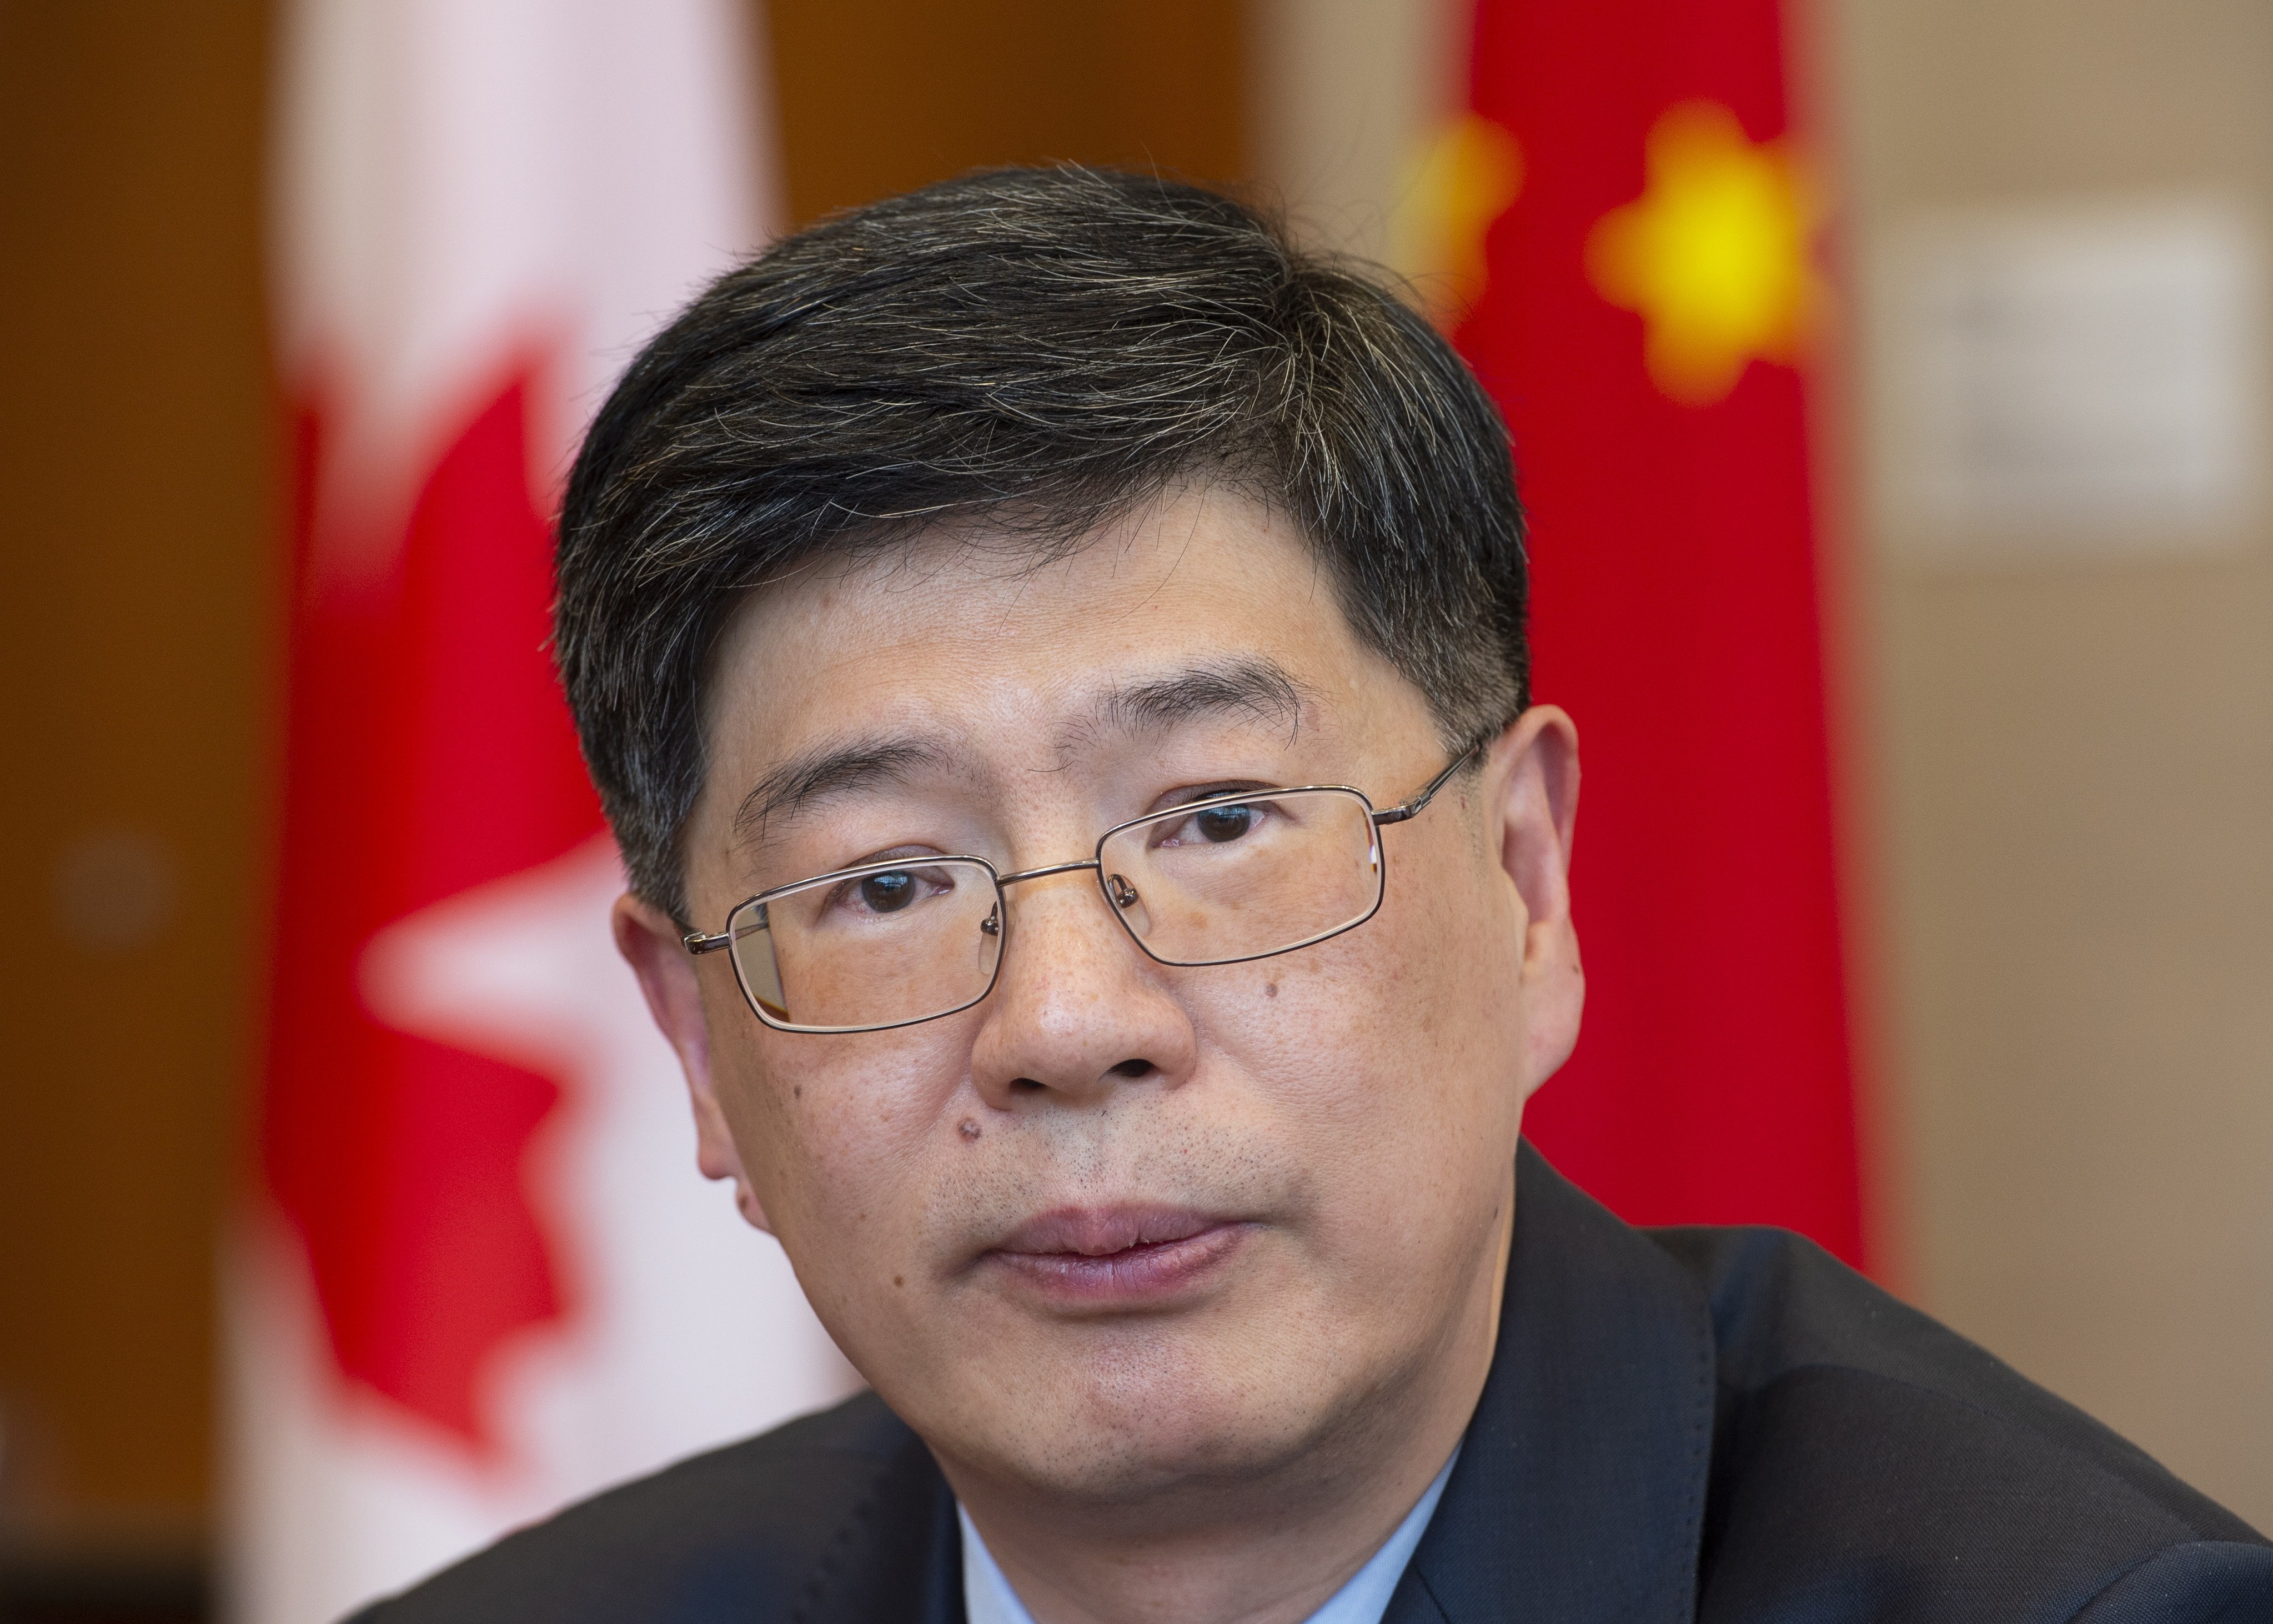 Cong Peiwu, China’s ambassador to Canada, was summoned by the Canadian foreign ministry on Thursday. Photo: AP